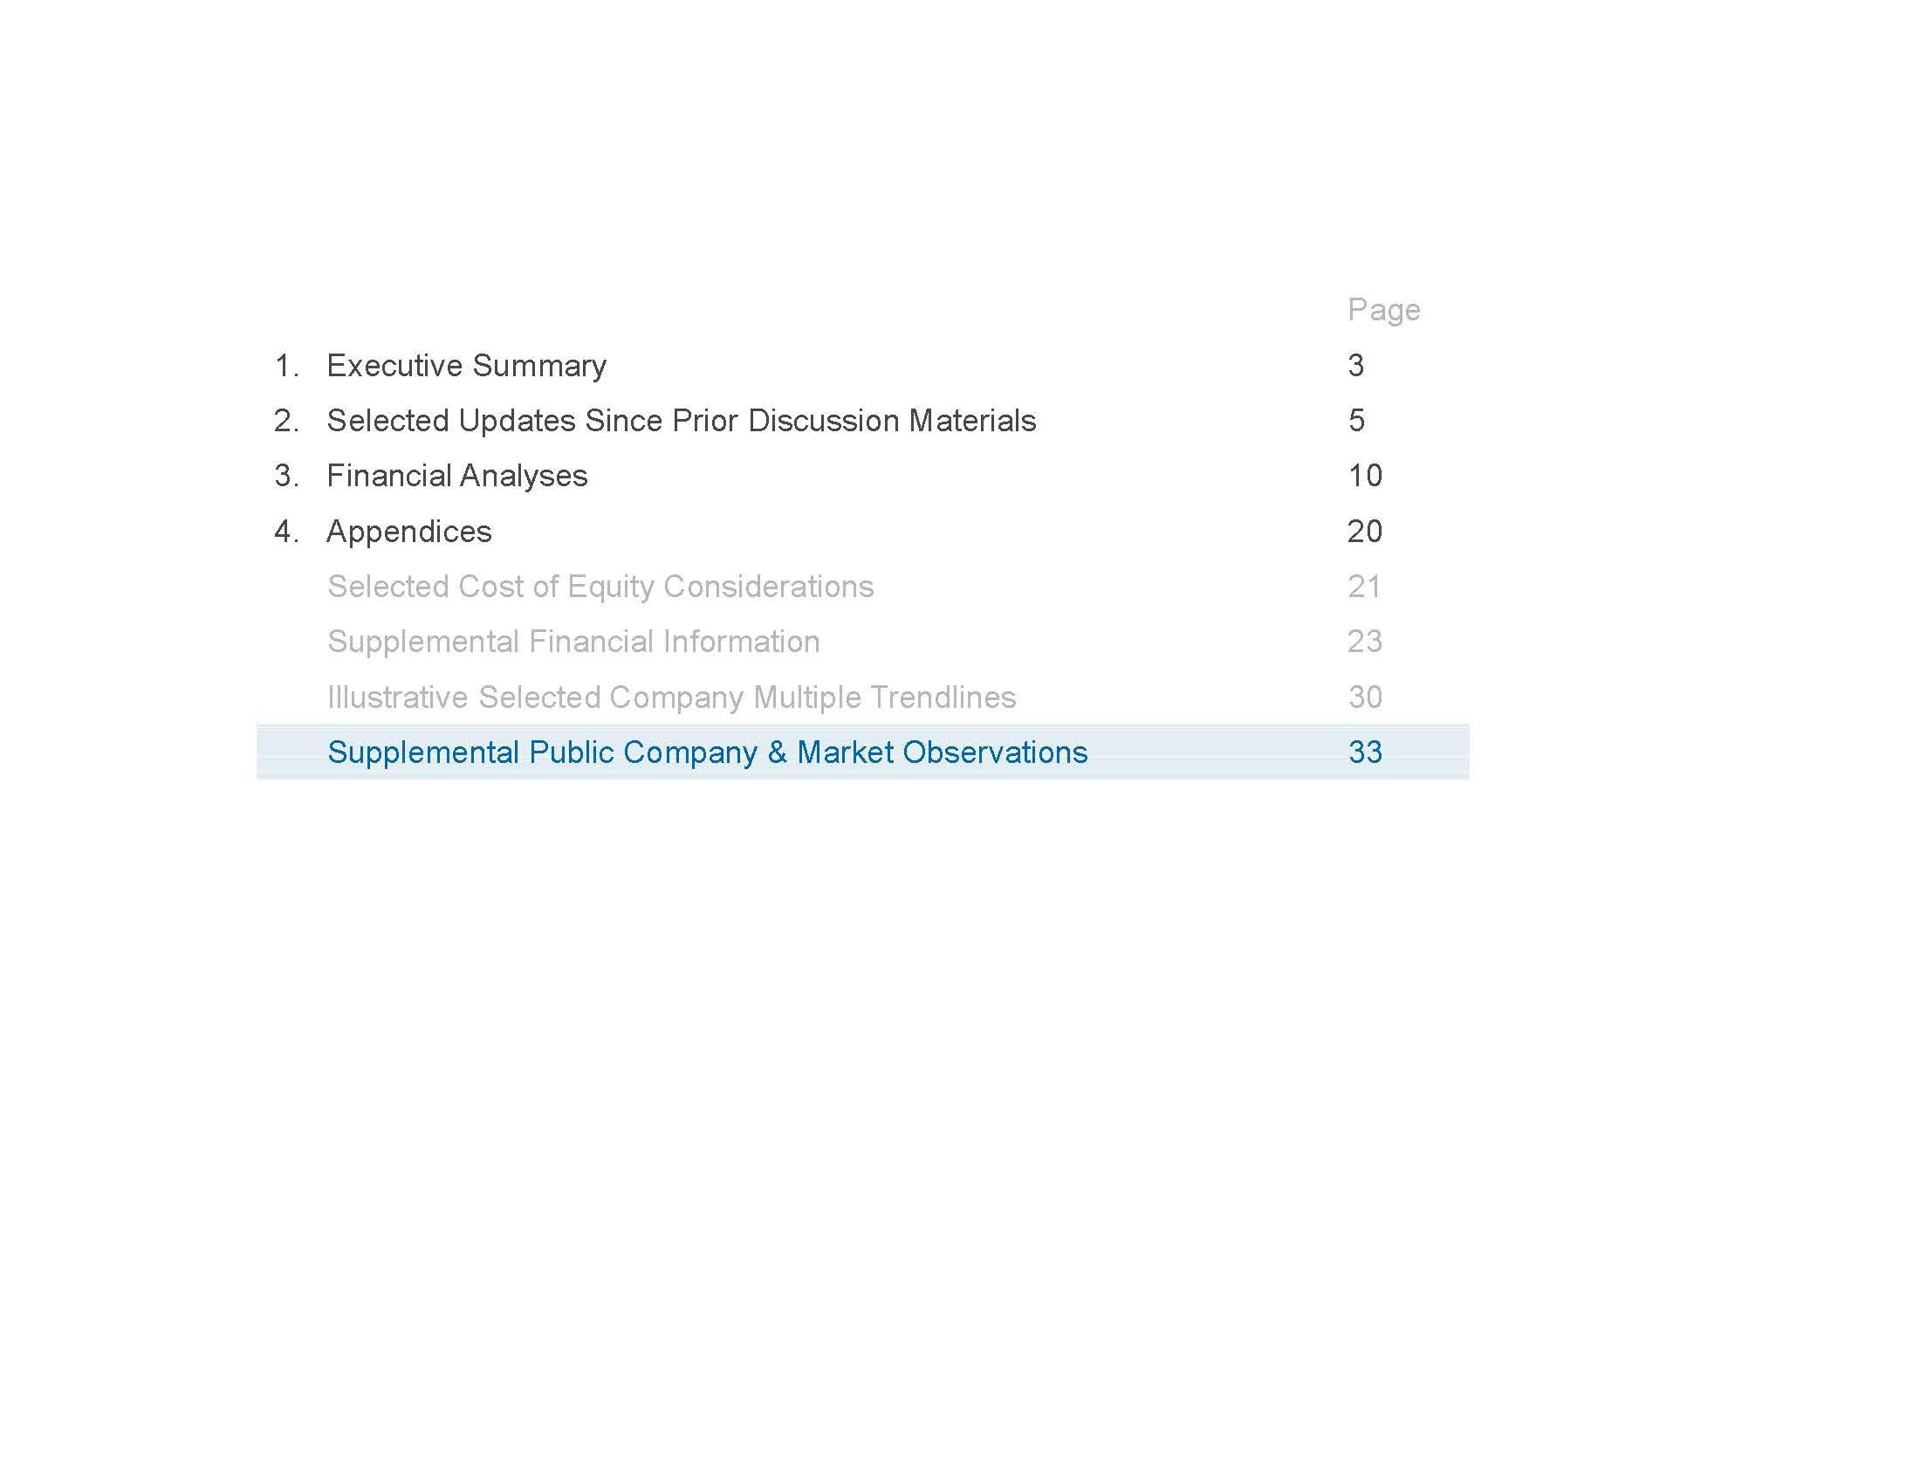 executive summary financial analyses selected updates since prior discussion materials appendices supplemental public company market observations | Houlihan Lokey